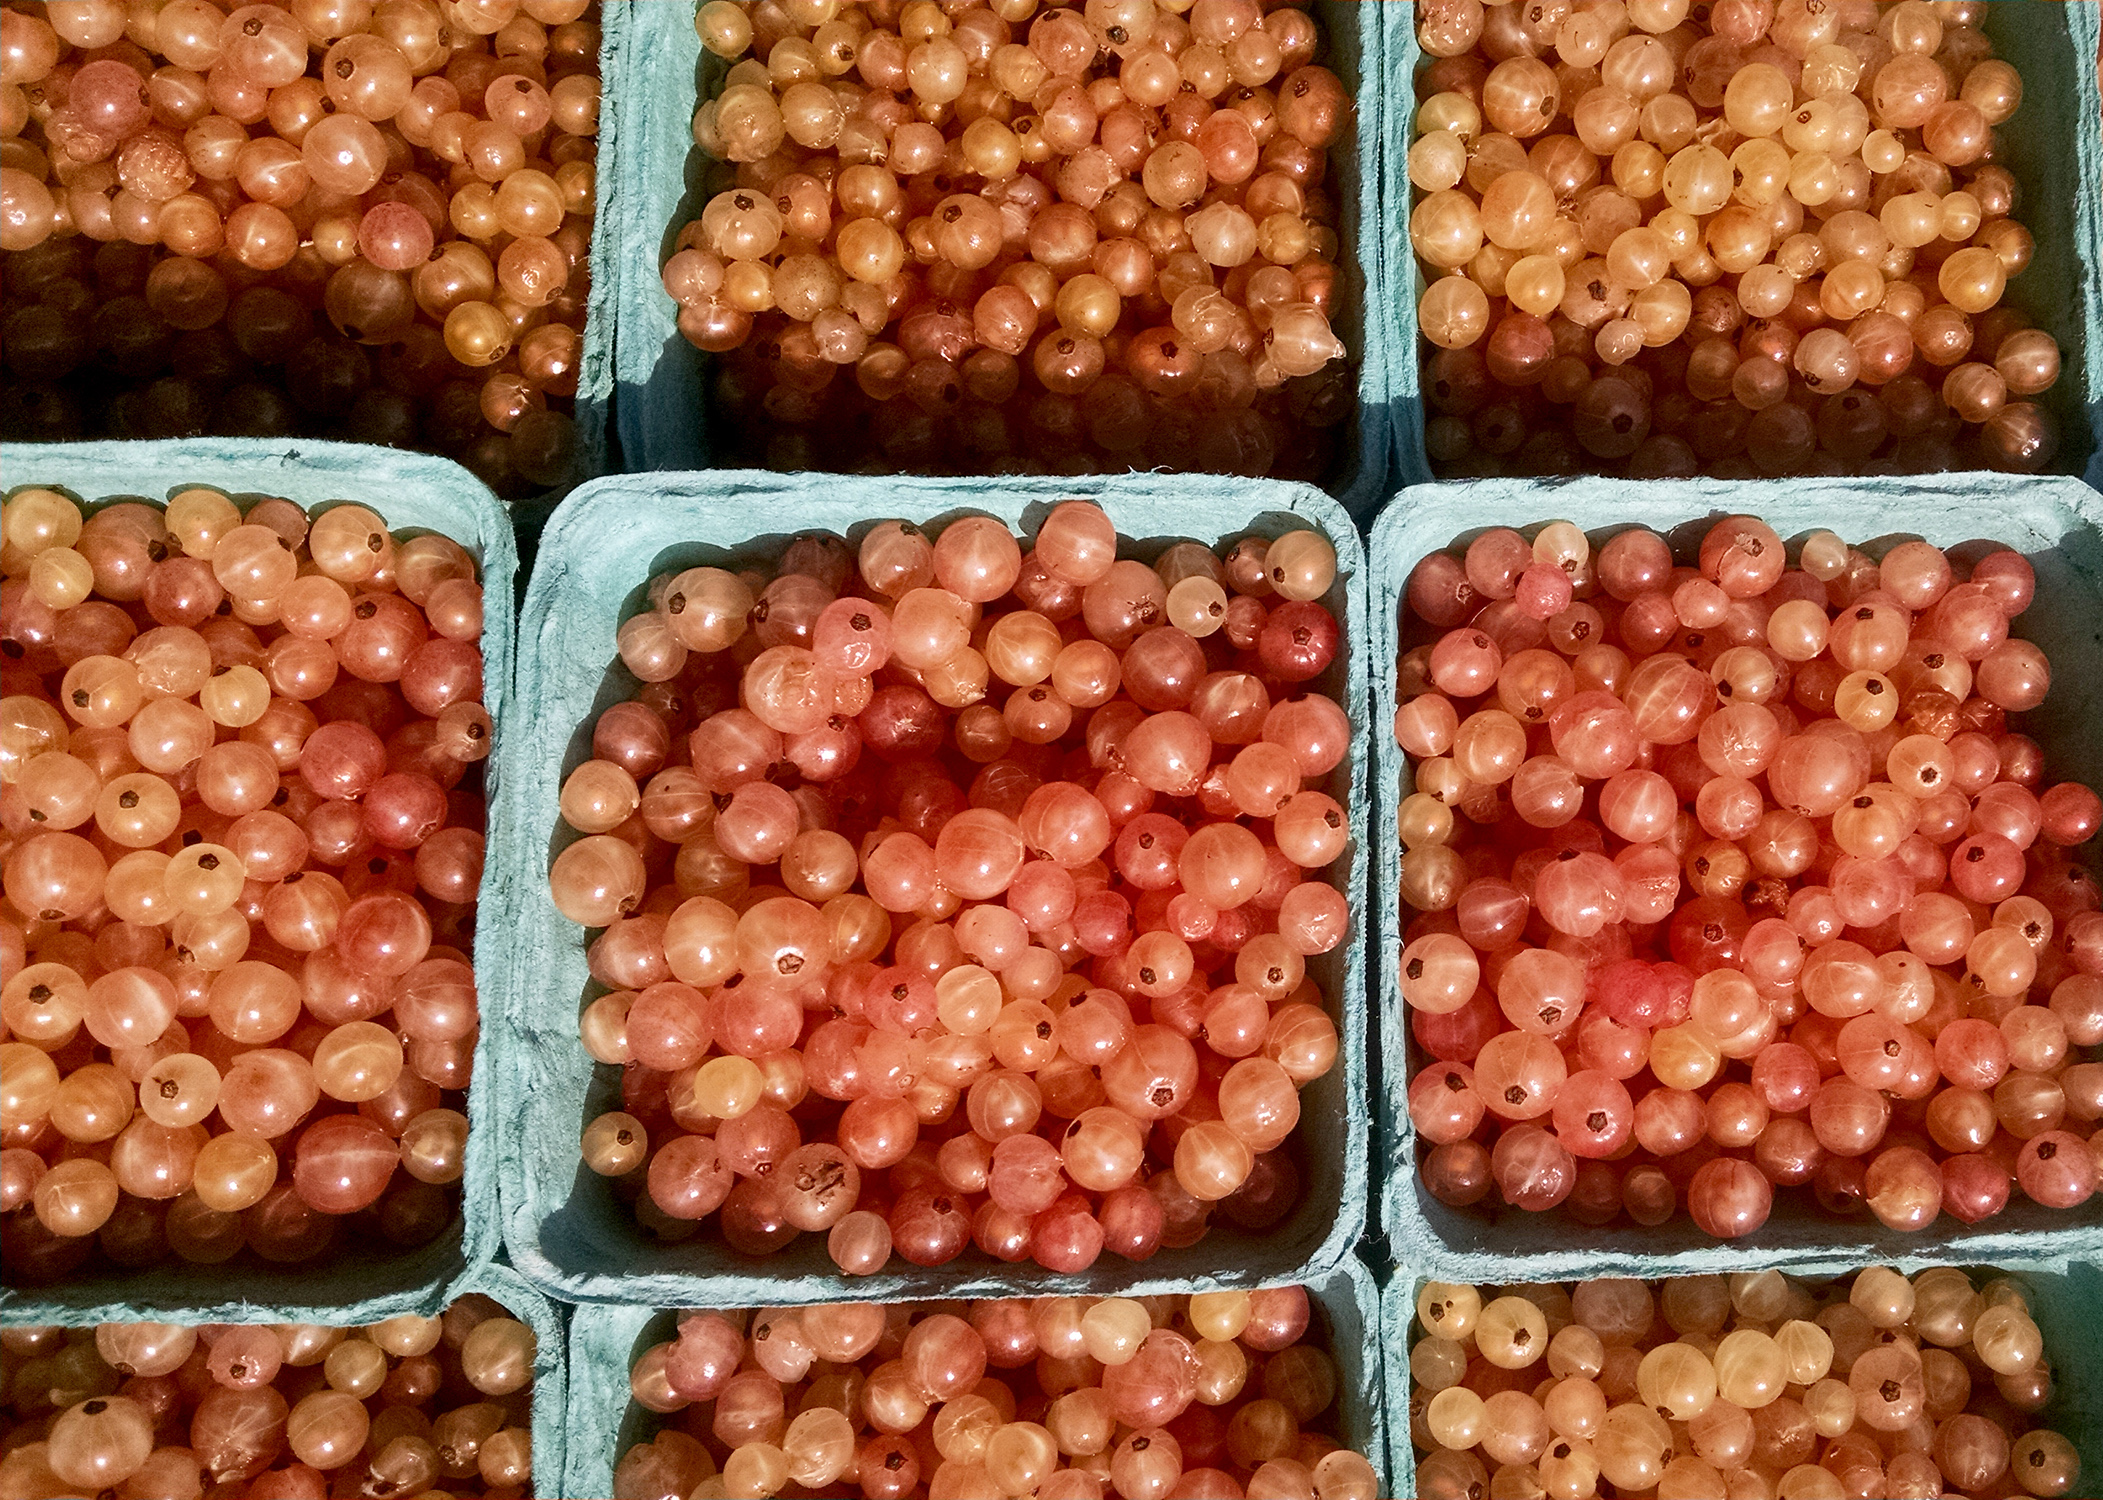 Pink Champagne Currants